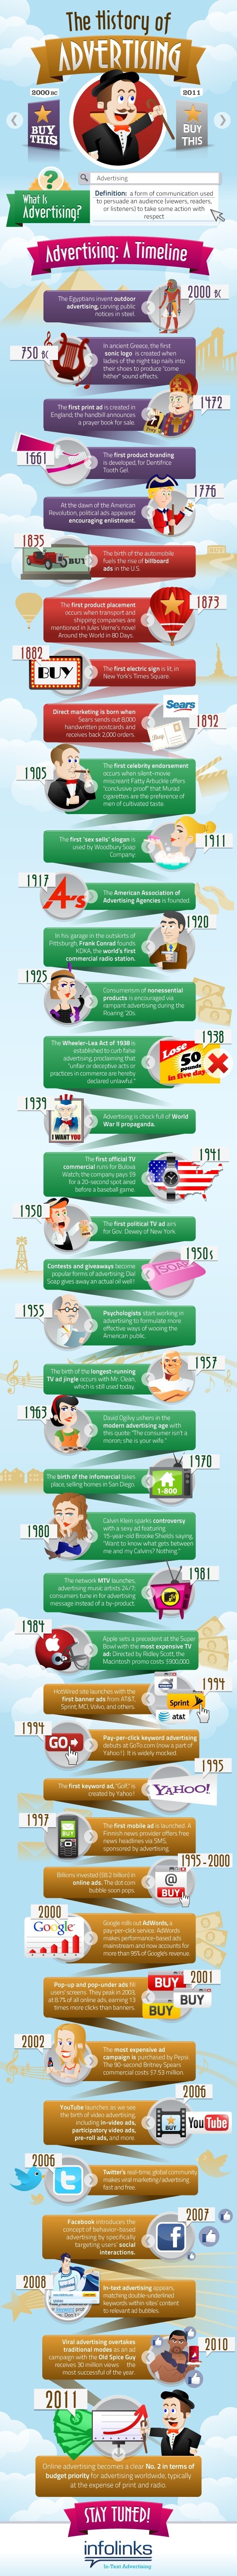 history-of-advertising